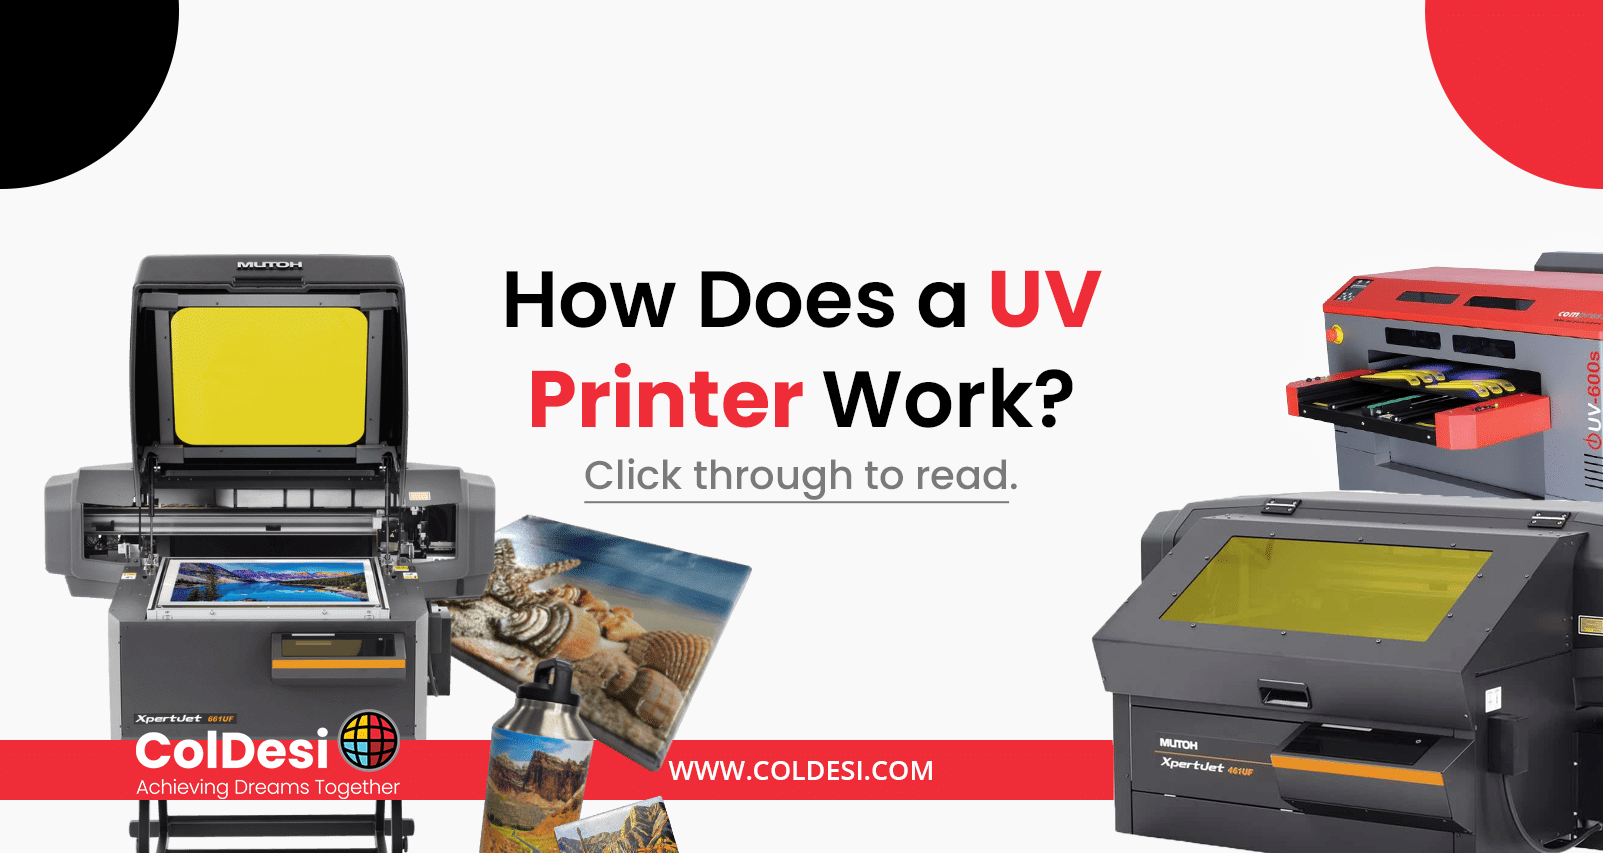 How Does a UV Printer Work?